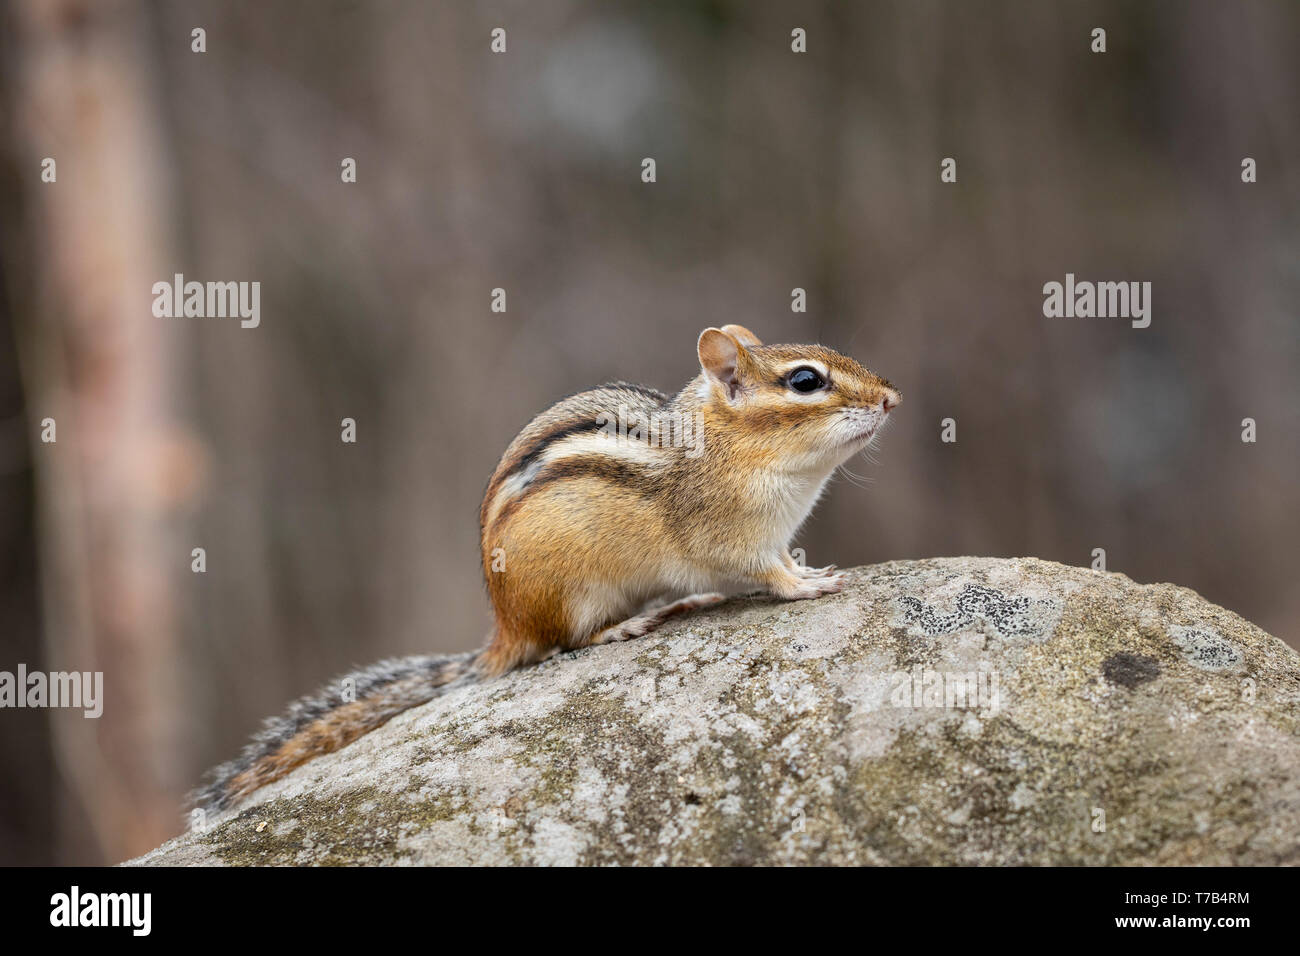 MAYNOOTH, ONTARIO, CANADA - April 30, 2019: A chipmunk (Tamias), part of the Sciuridae family forages for food.  ( Ryan Carter ) Stock Photo